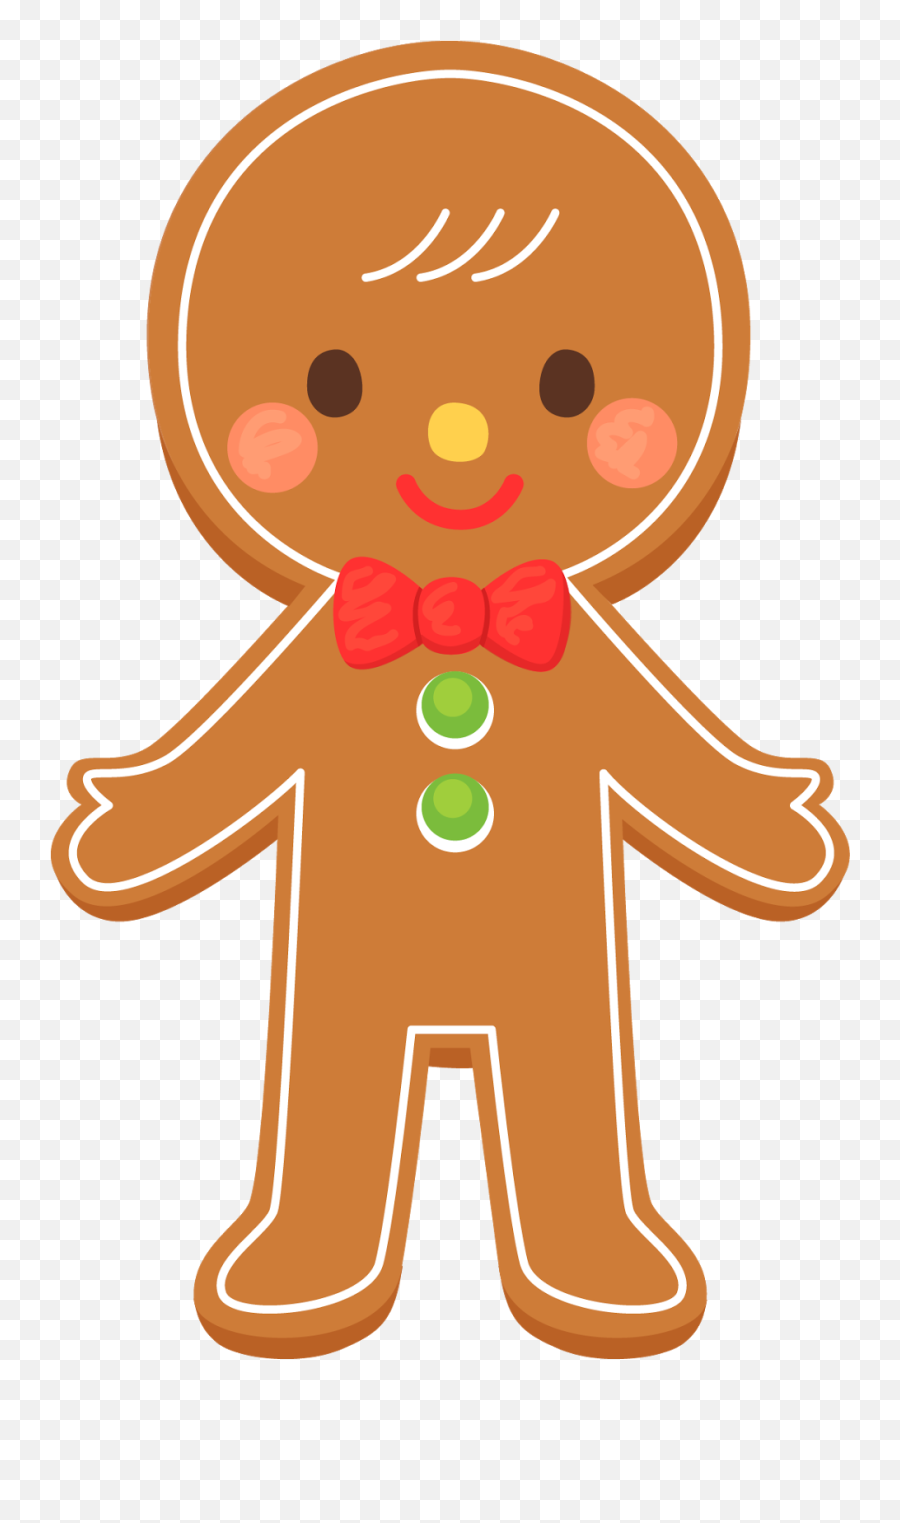 Free Gingerbread Man Cliparts The - Transparent Background Gingerbread Man Clipart Emoji,Ginger Emoji Iphone